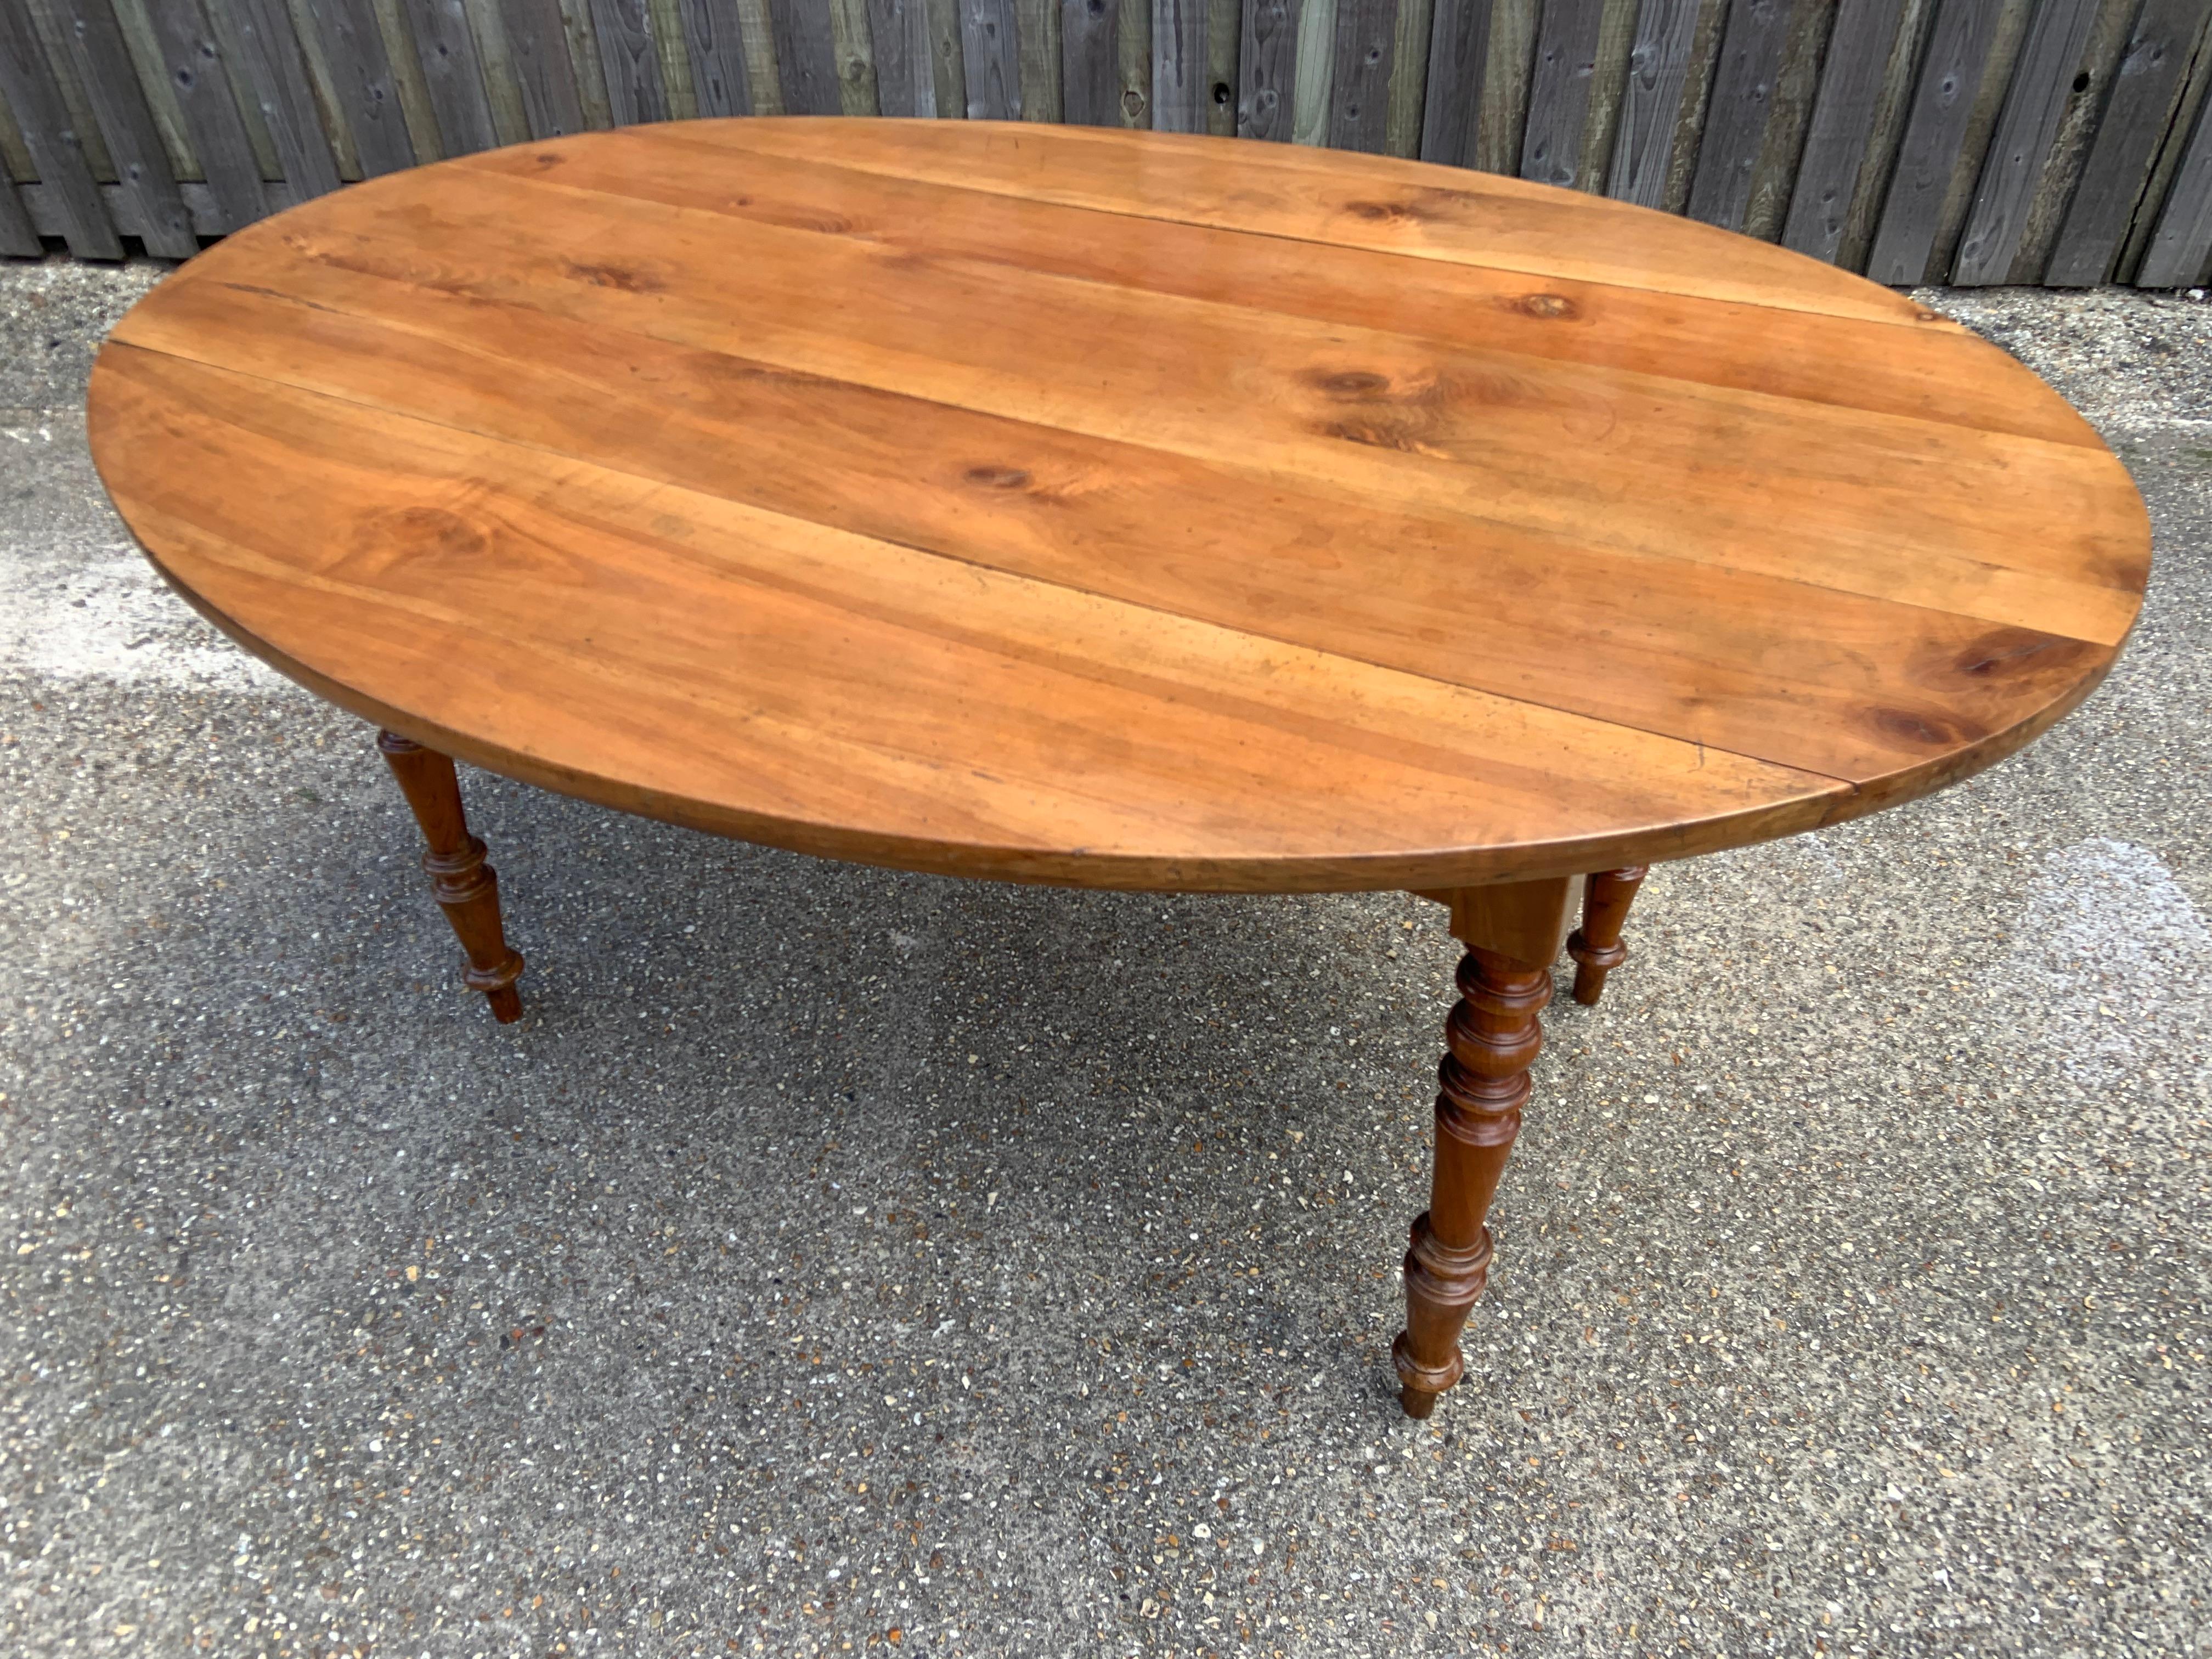 19th Century Antique Cherry Tapered Leg Oval Drop Leaf Table For Sale